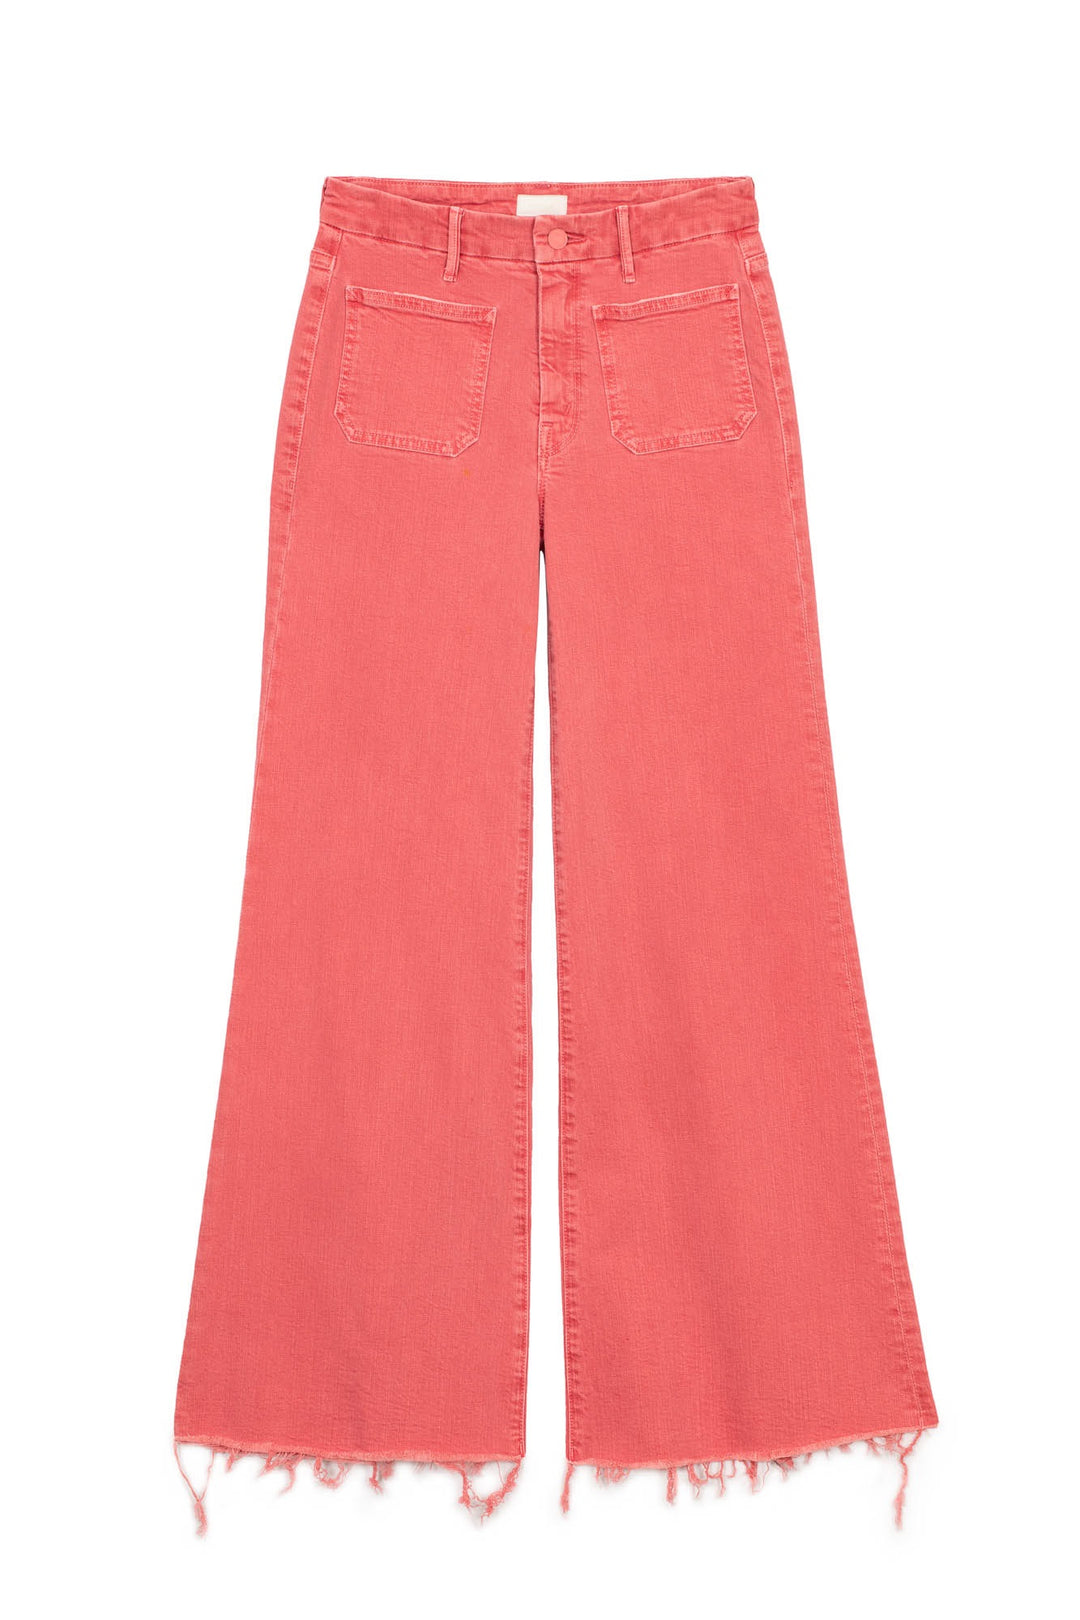 Mother Denim - The Patch Pocket Roller Fray Wide-Leg Jeans in Mauve Glow